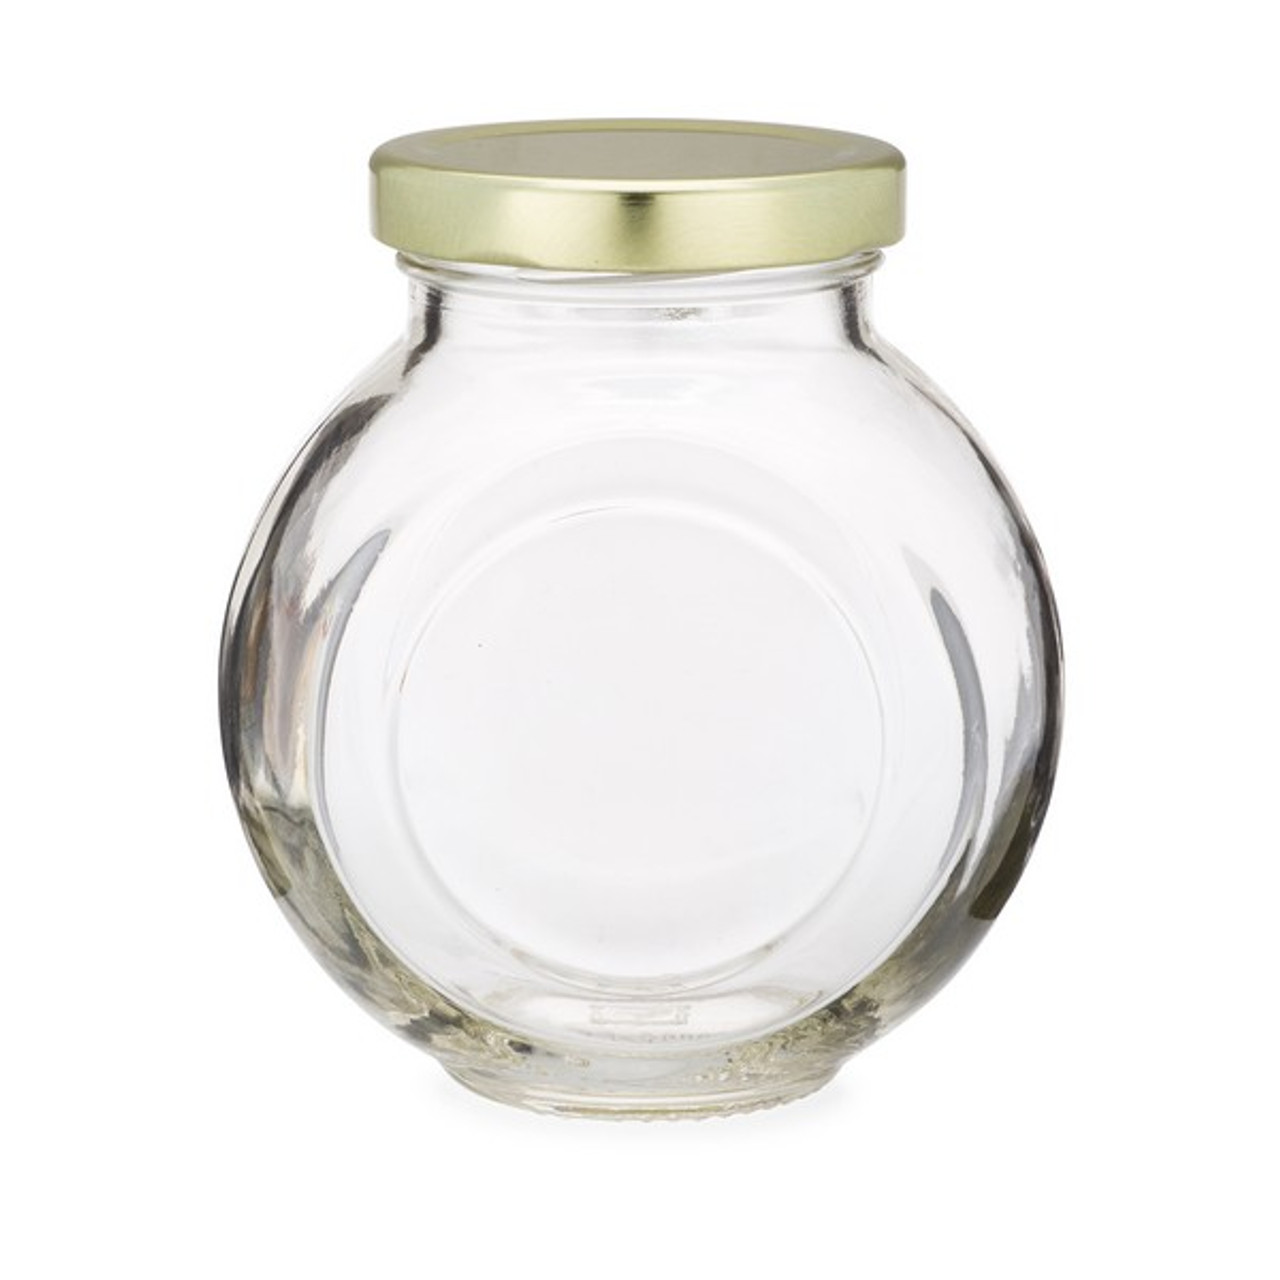 10 oz. Apothecary Jar - with Choice of Lid - priced per case of 12 jars